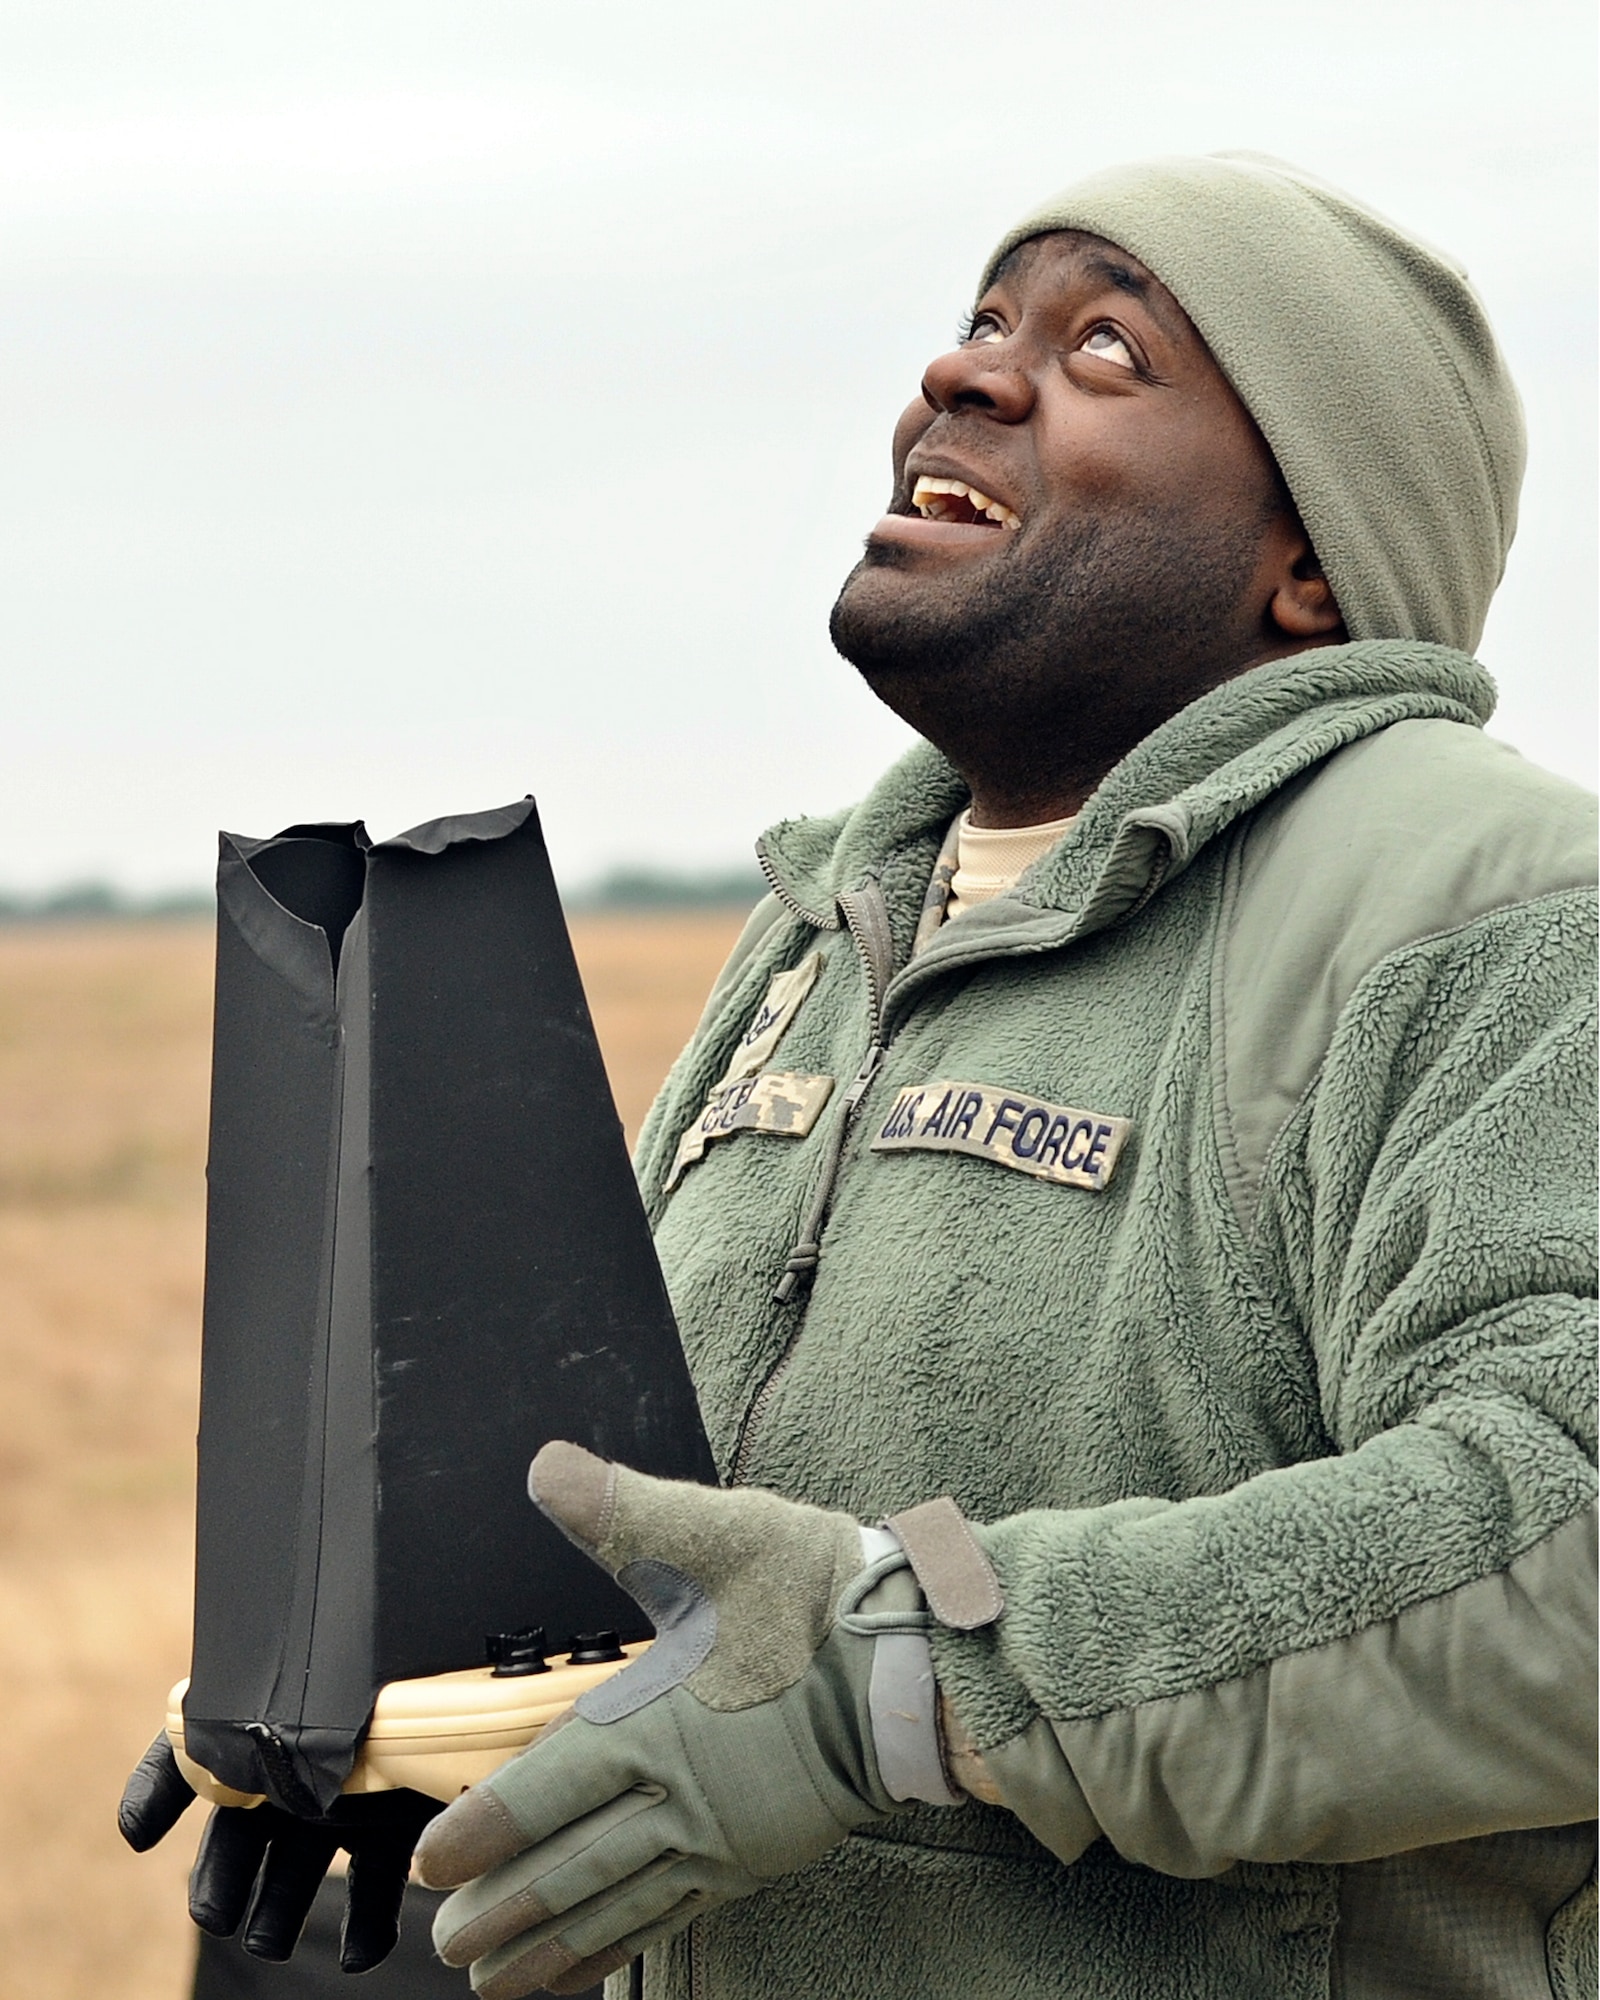 Staff Sgt. Jonathan Carter, 1st Special Operations Security Forces Squadron desk sergeant, watches a RQ-11B Raven fly at Choctaw Field, Fla., March 4, 2014. The small unmanned aerial system can take photographs and live video. (U.S. Air Force photo/Senior Airman Michelle Patten)